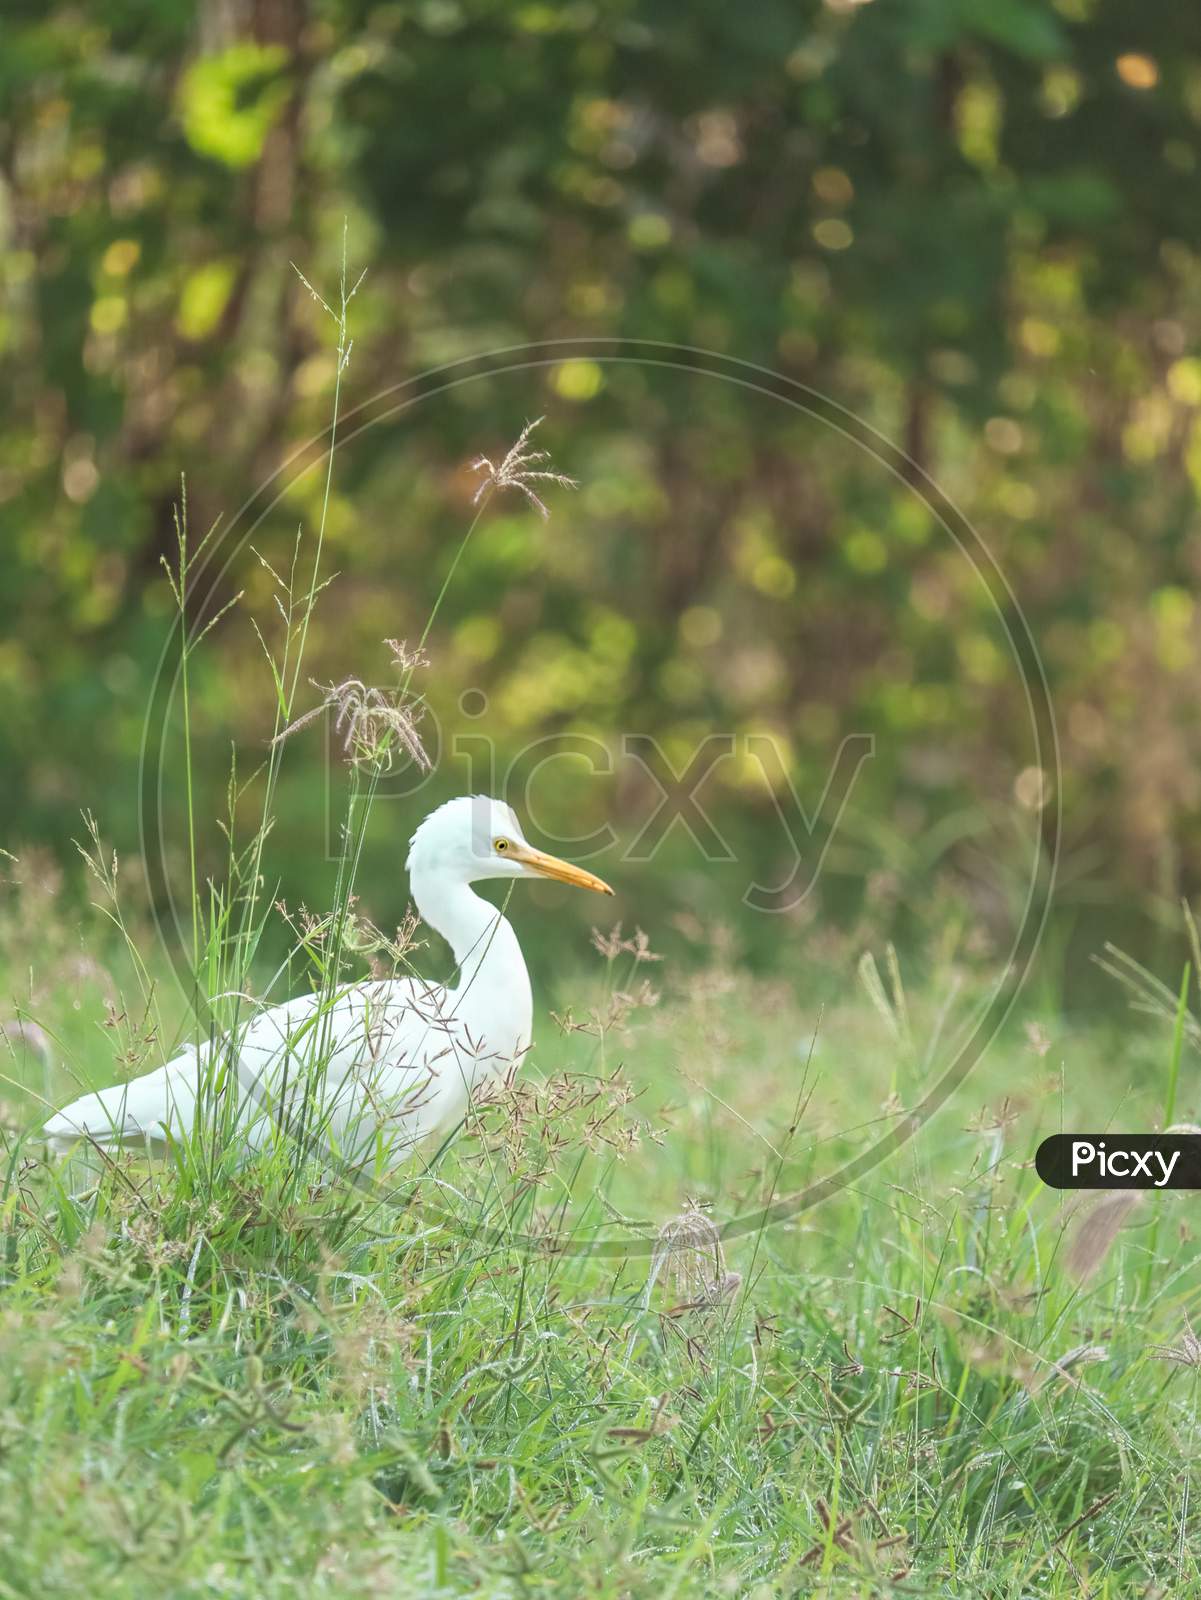 A Common Grey Heron Hiding Behind A The Wild Grass In India Forest With The Nice Bokeh And Focus Only On Heron Eyes.